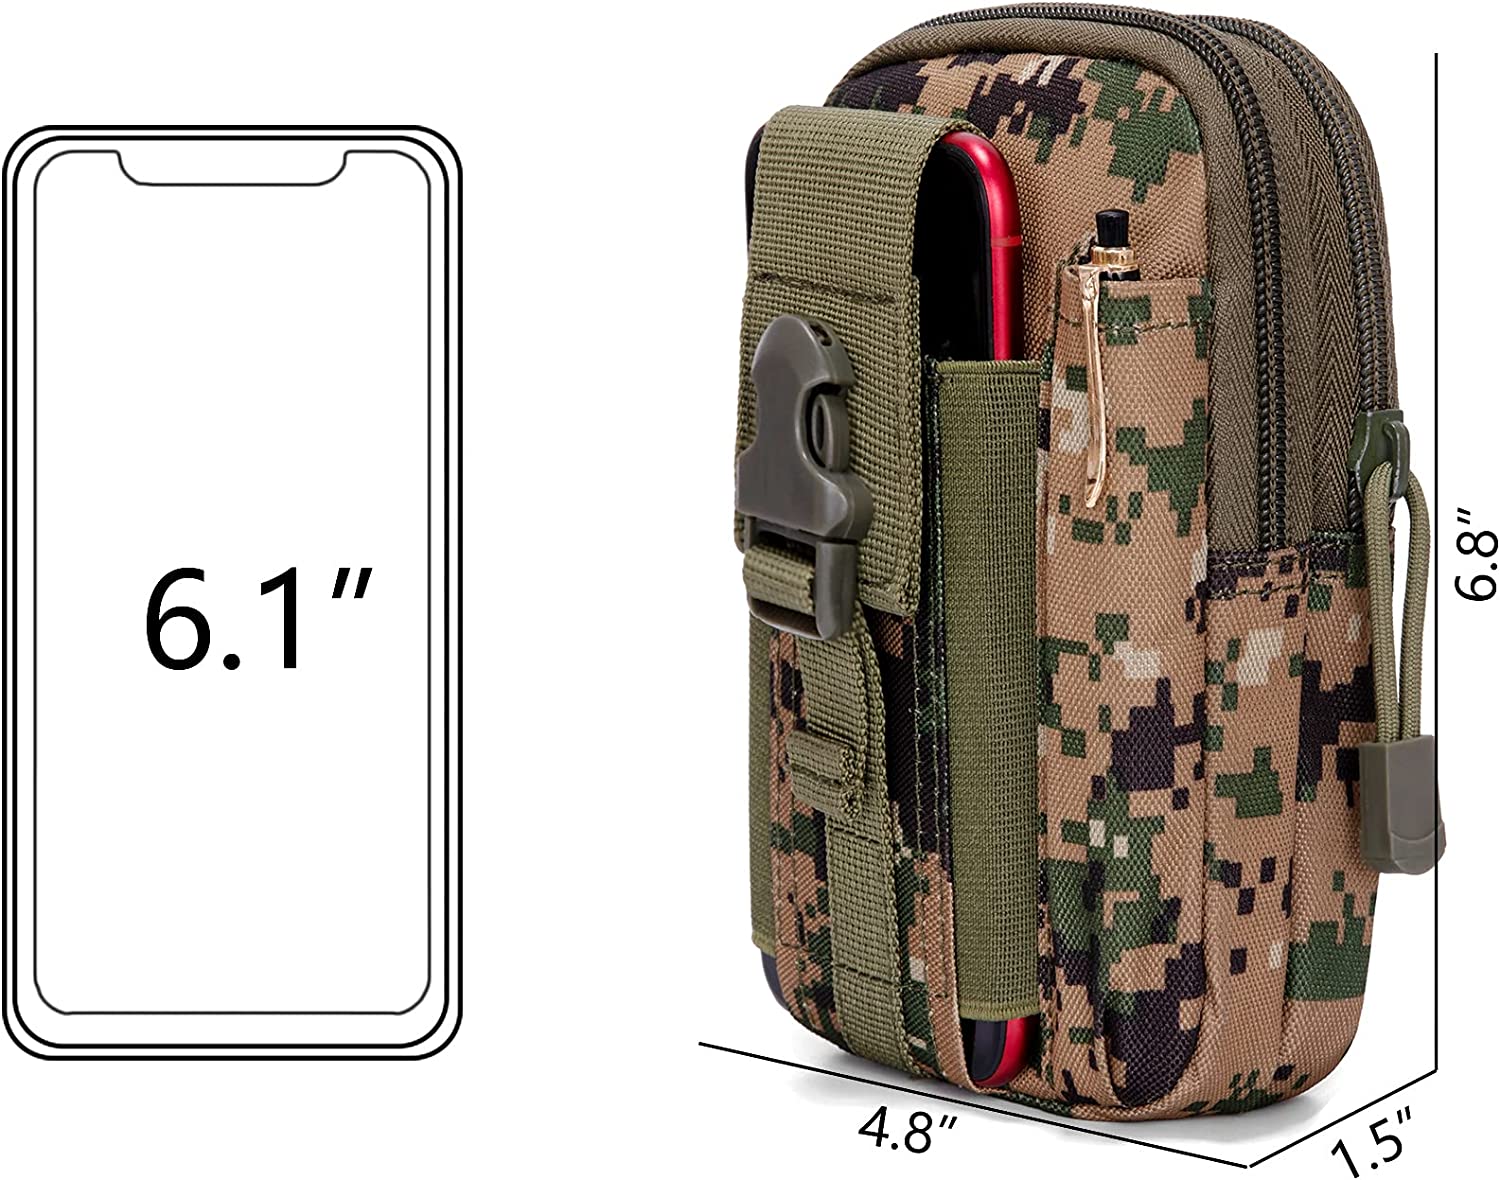 Tactical MOLLE Pouch & Waist Bag for Hiking & Outdoor Activities-49